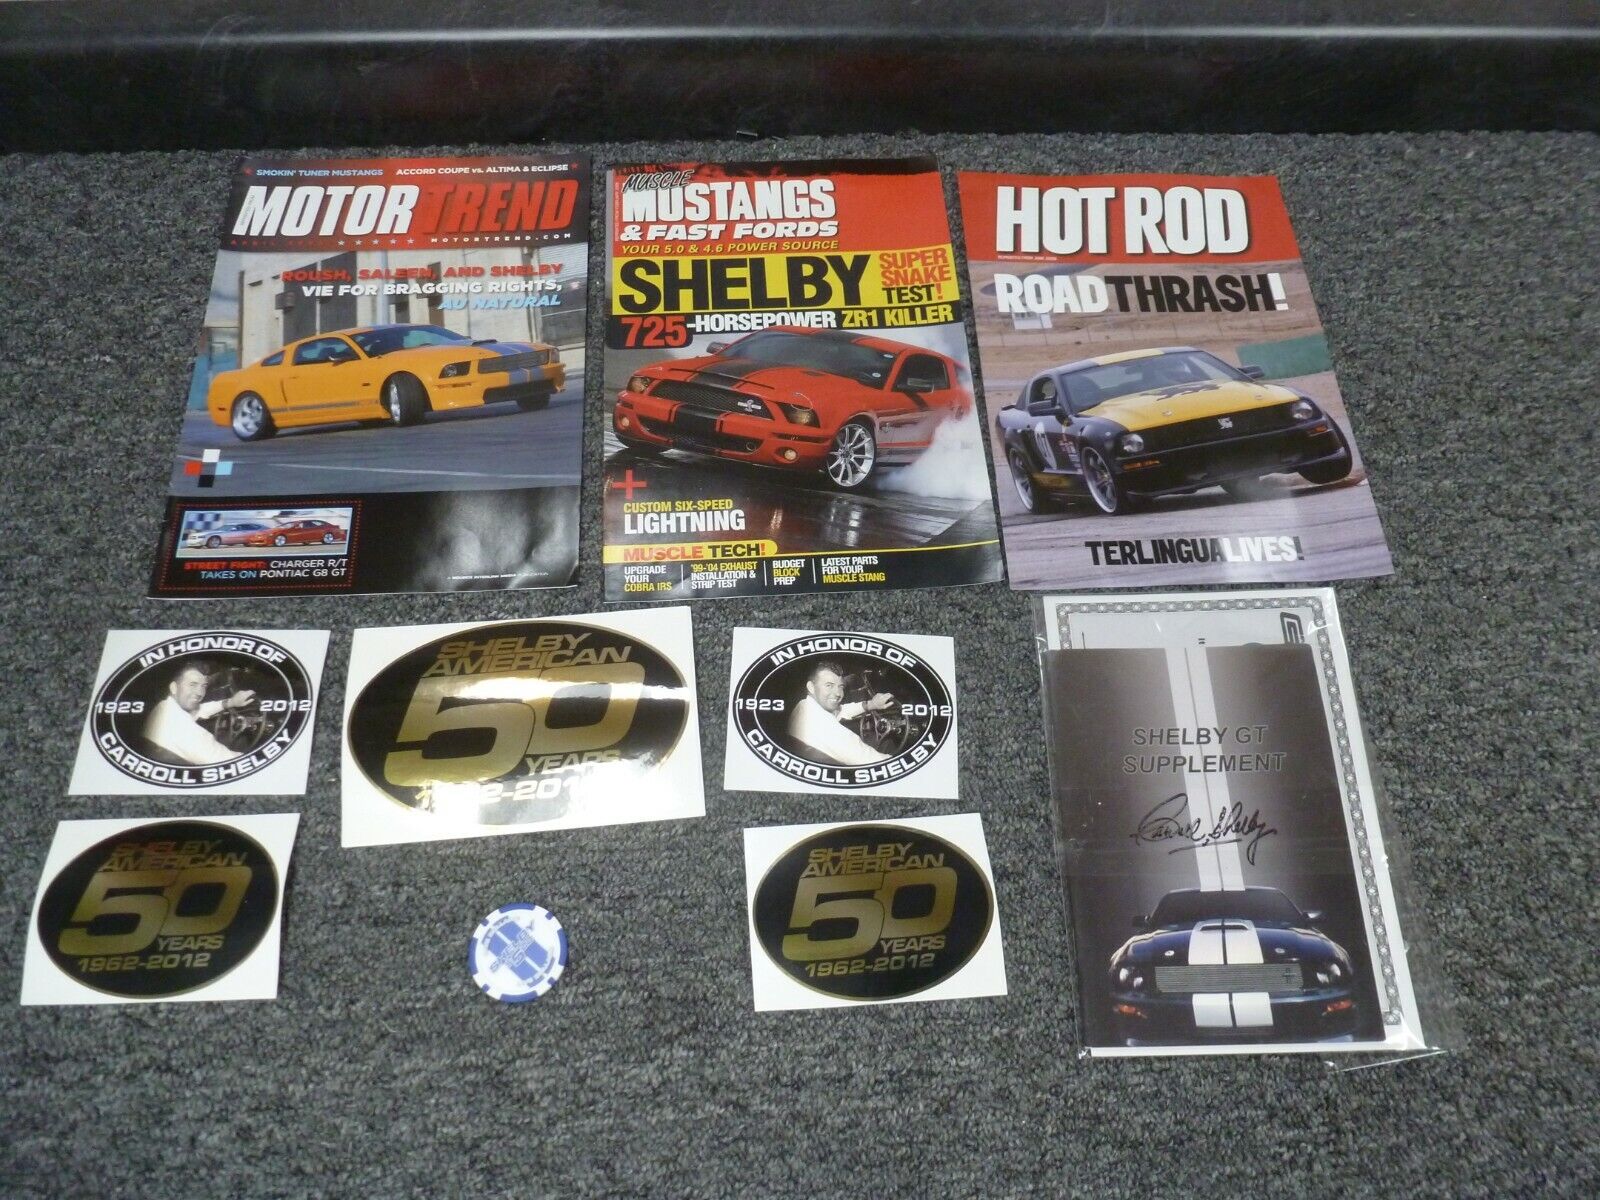 2006-2007 Ford Mustang Shelby GT Supplement SIGNED Carroll Shelby + Other Items